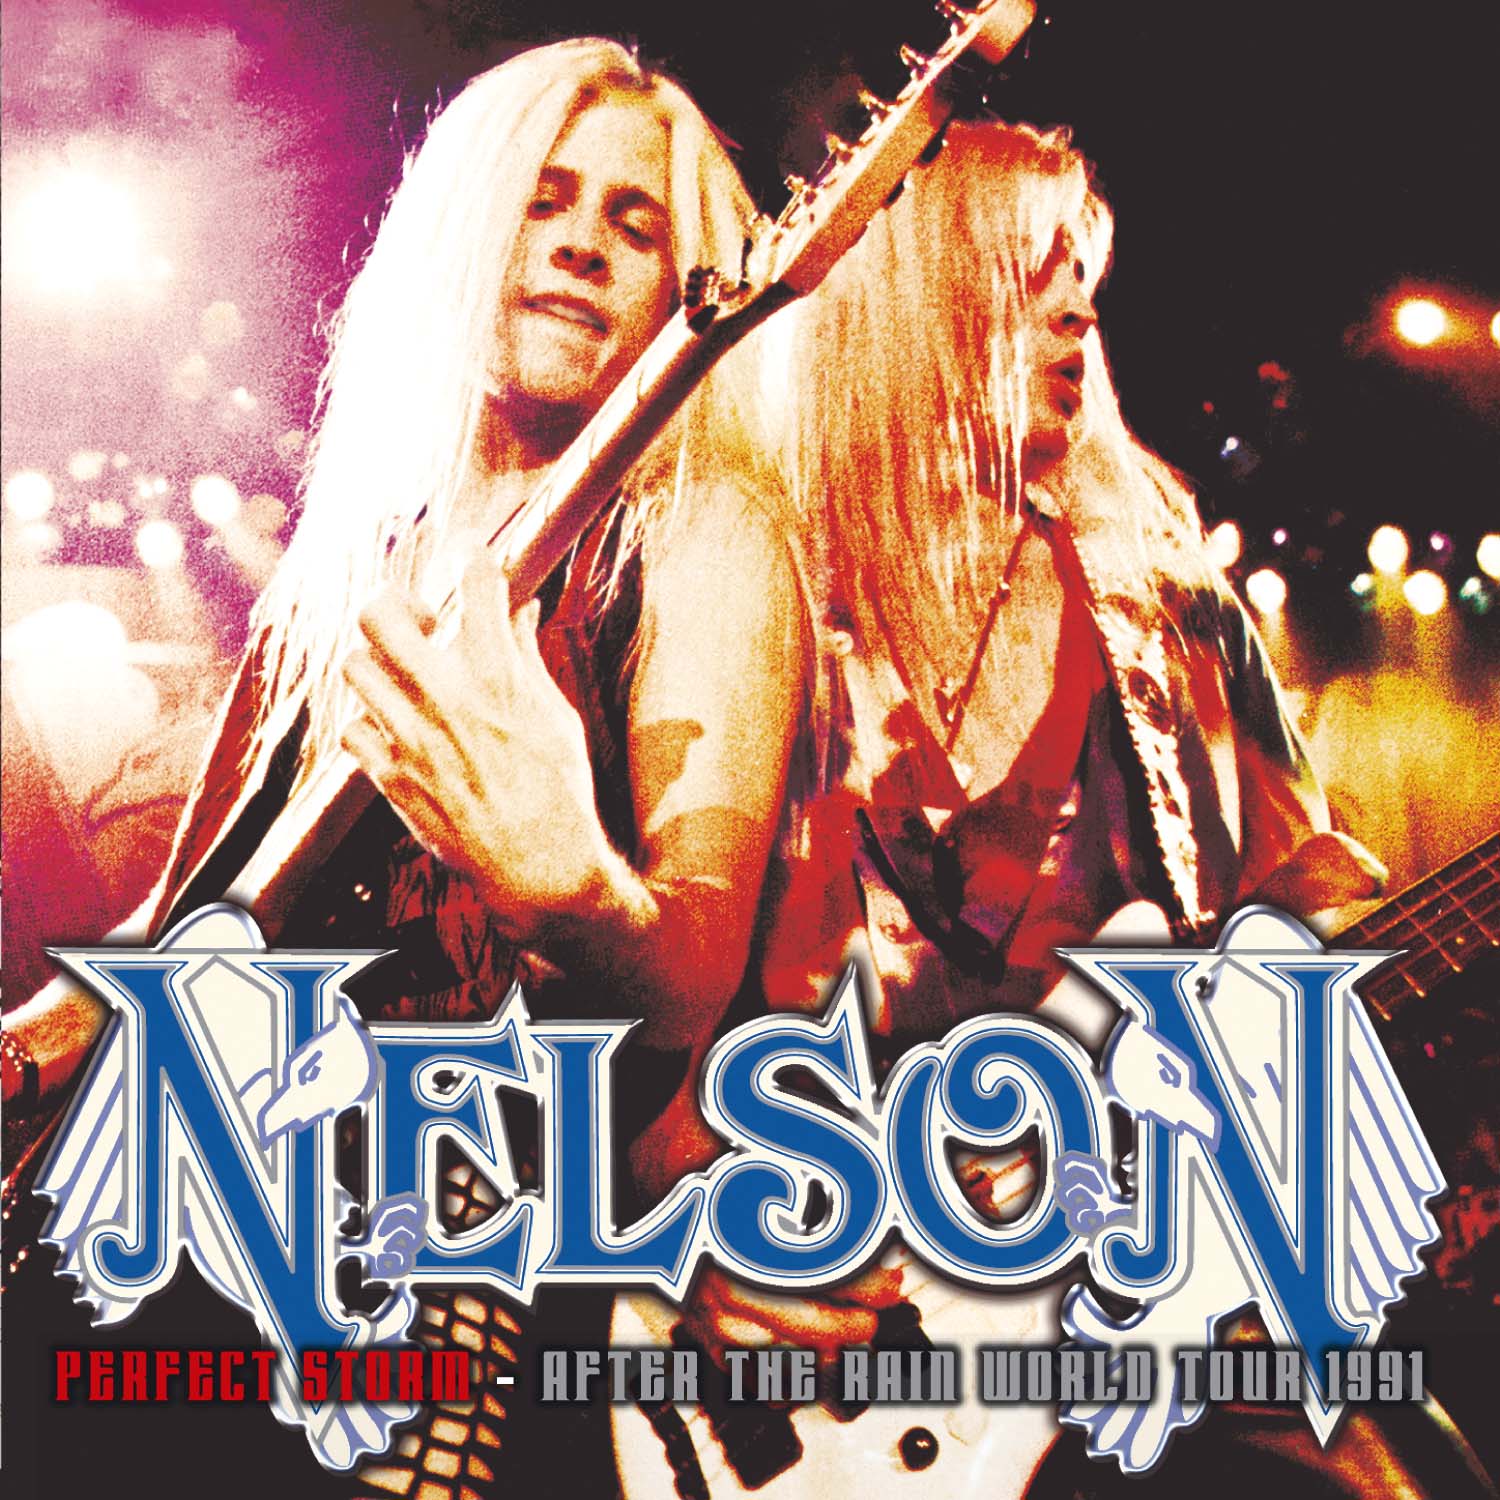 Nelson - Perfect Storm – After the Rain World Tour 1991